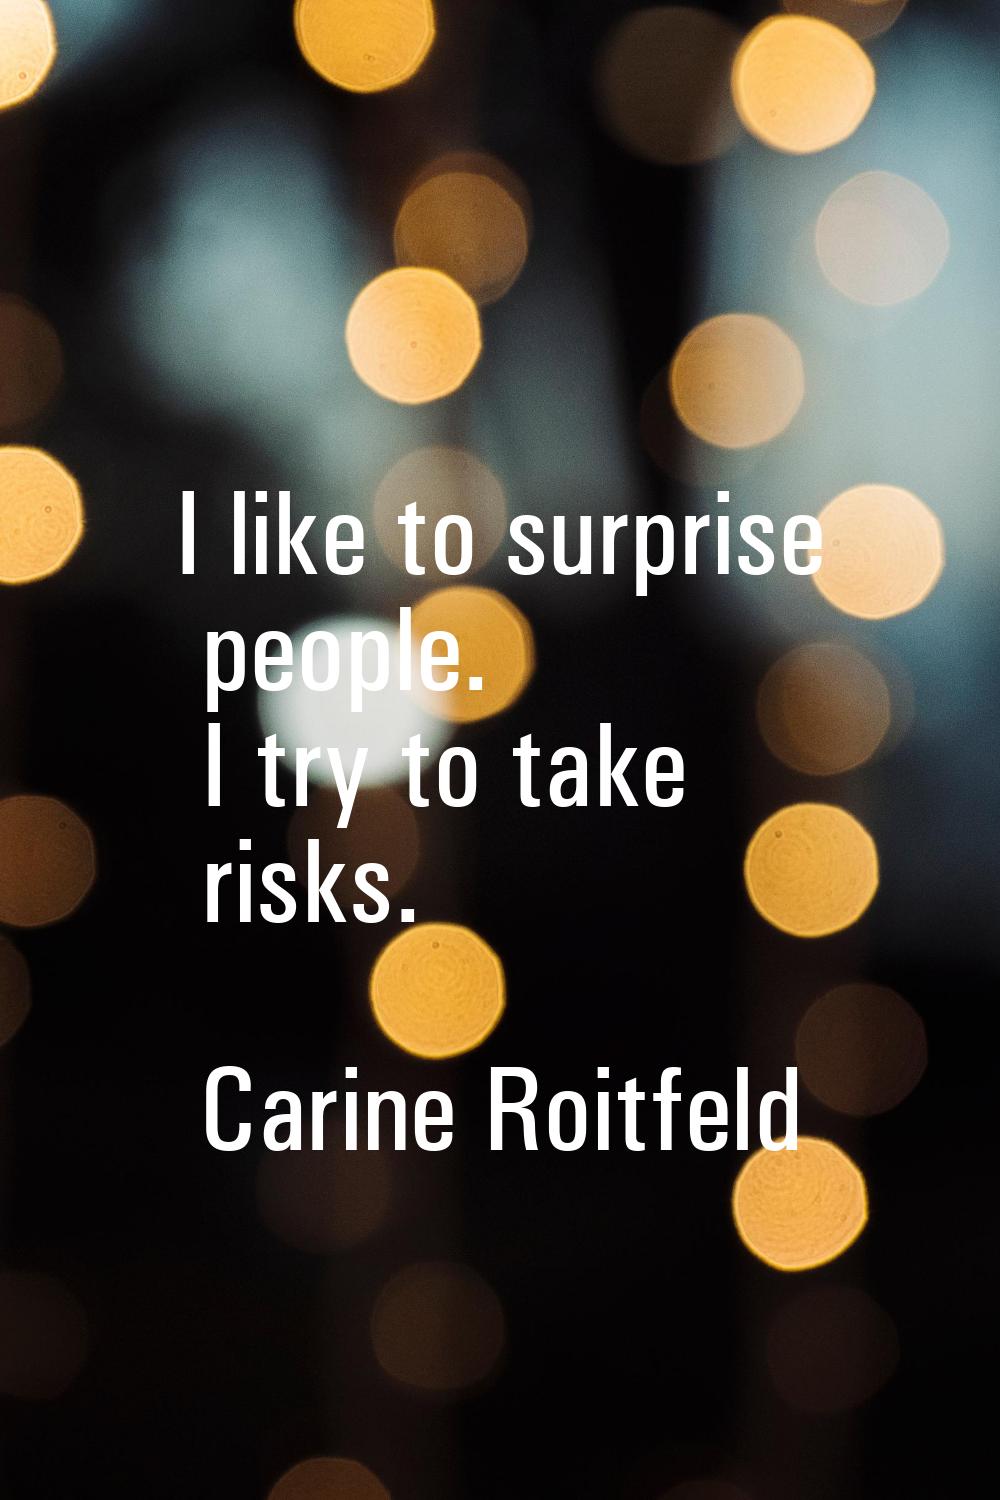 I like to surprise people. I try to take risks.